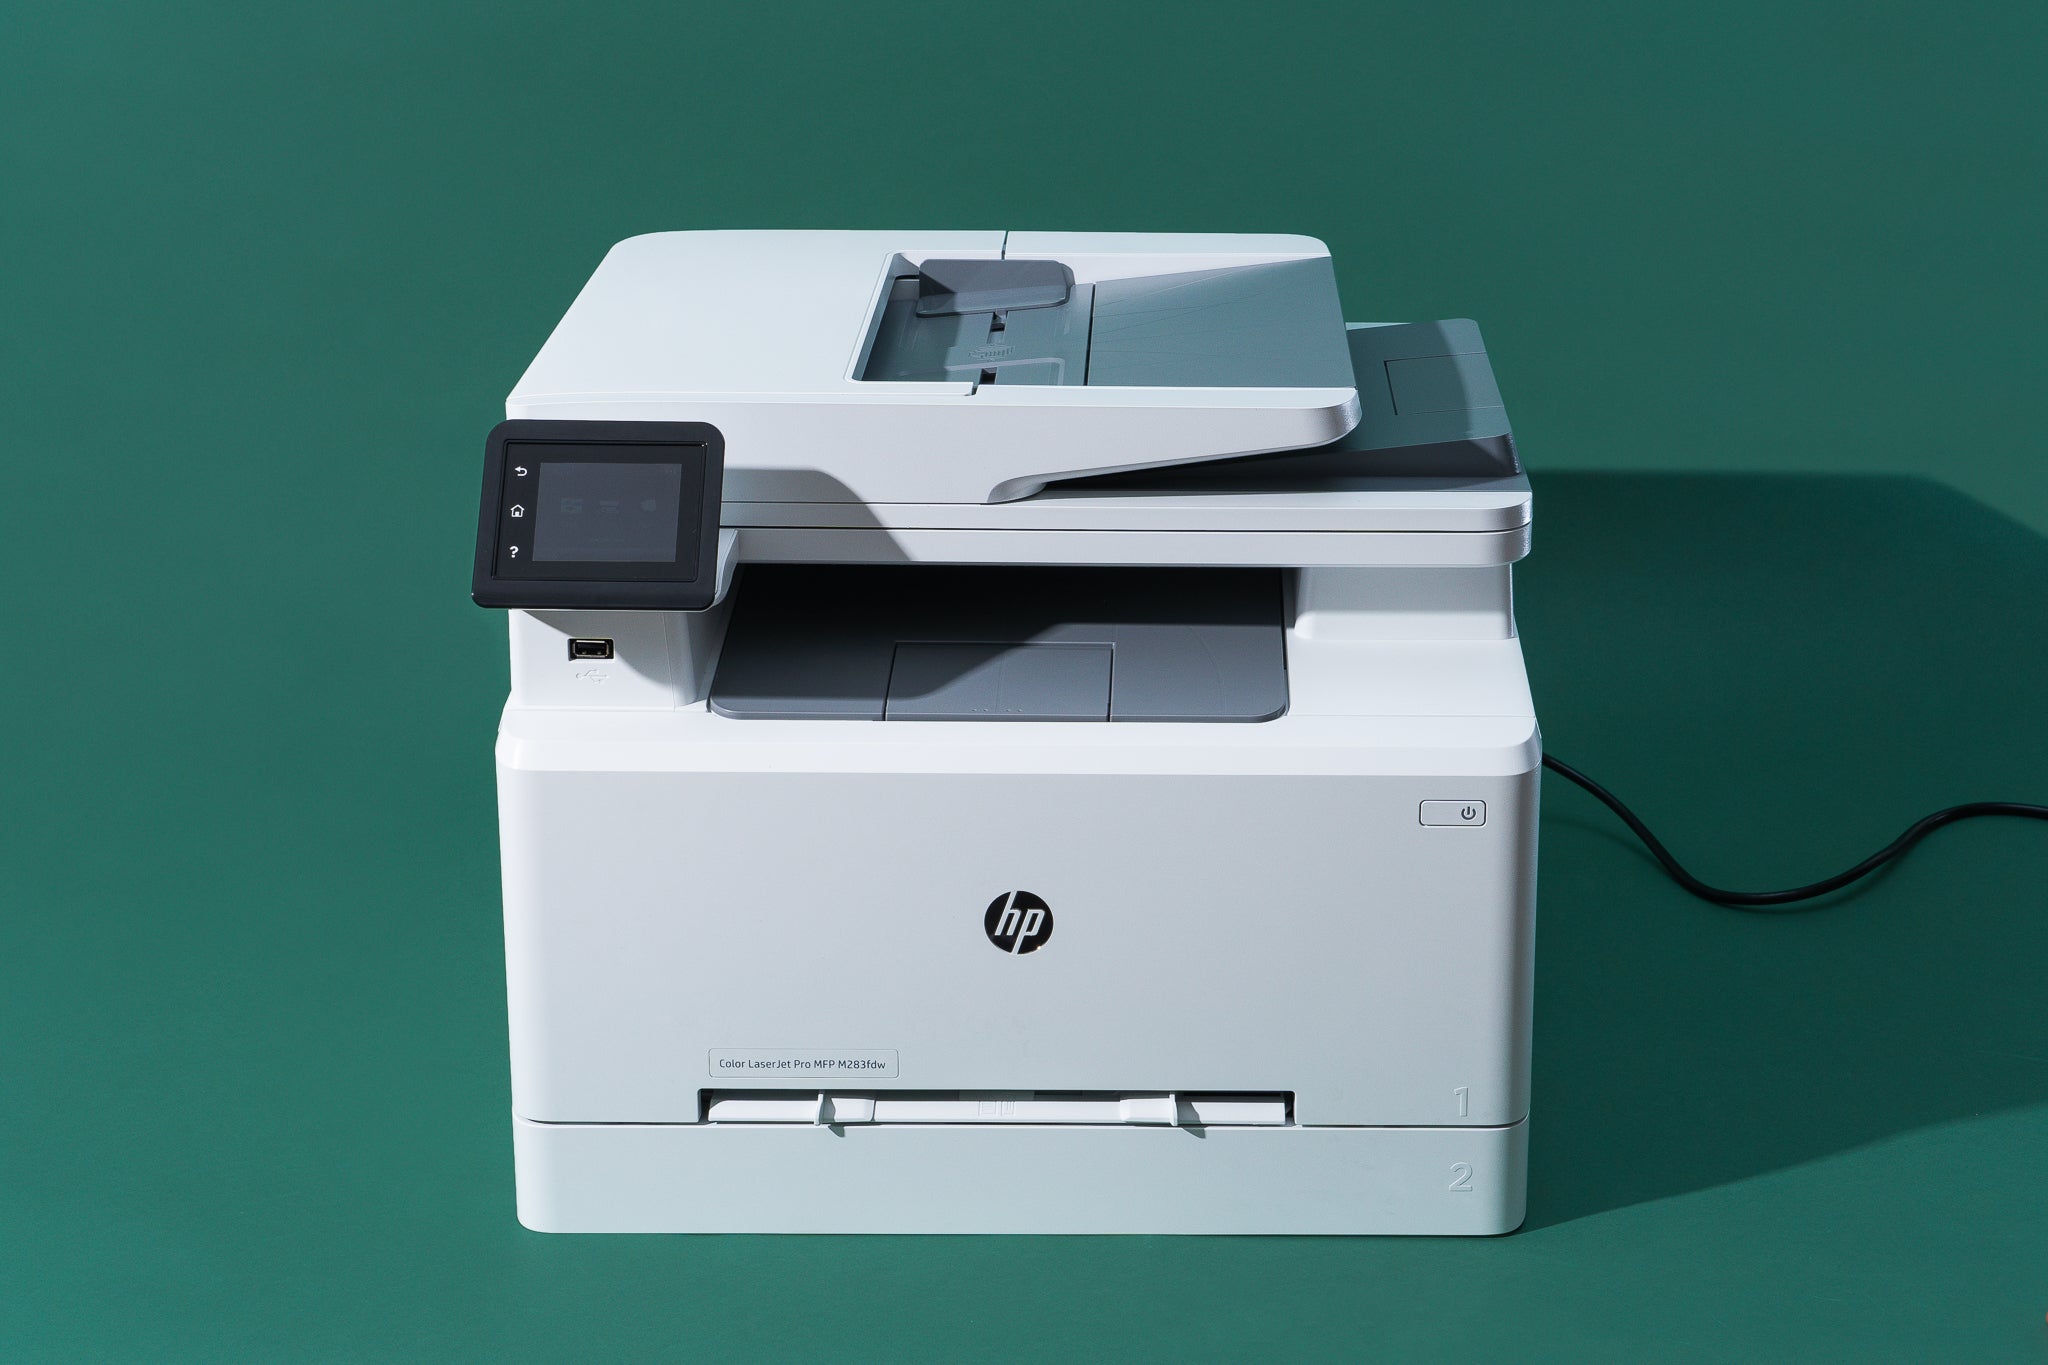 That executive at HP who said, "You know, people love our printers. They are tough and reliable and work for decades. We should make them terrile, break constantly, license the ink, make it all internet-linked so the printer won't even work when the wifi is down." u/Ignorad